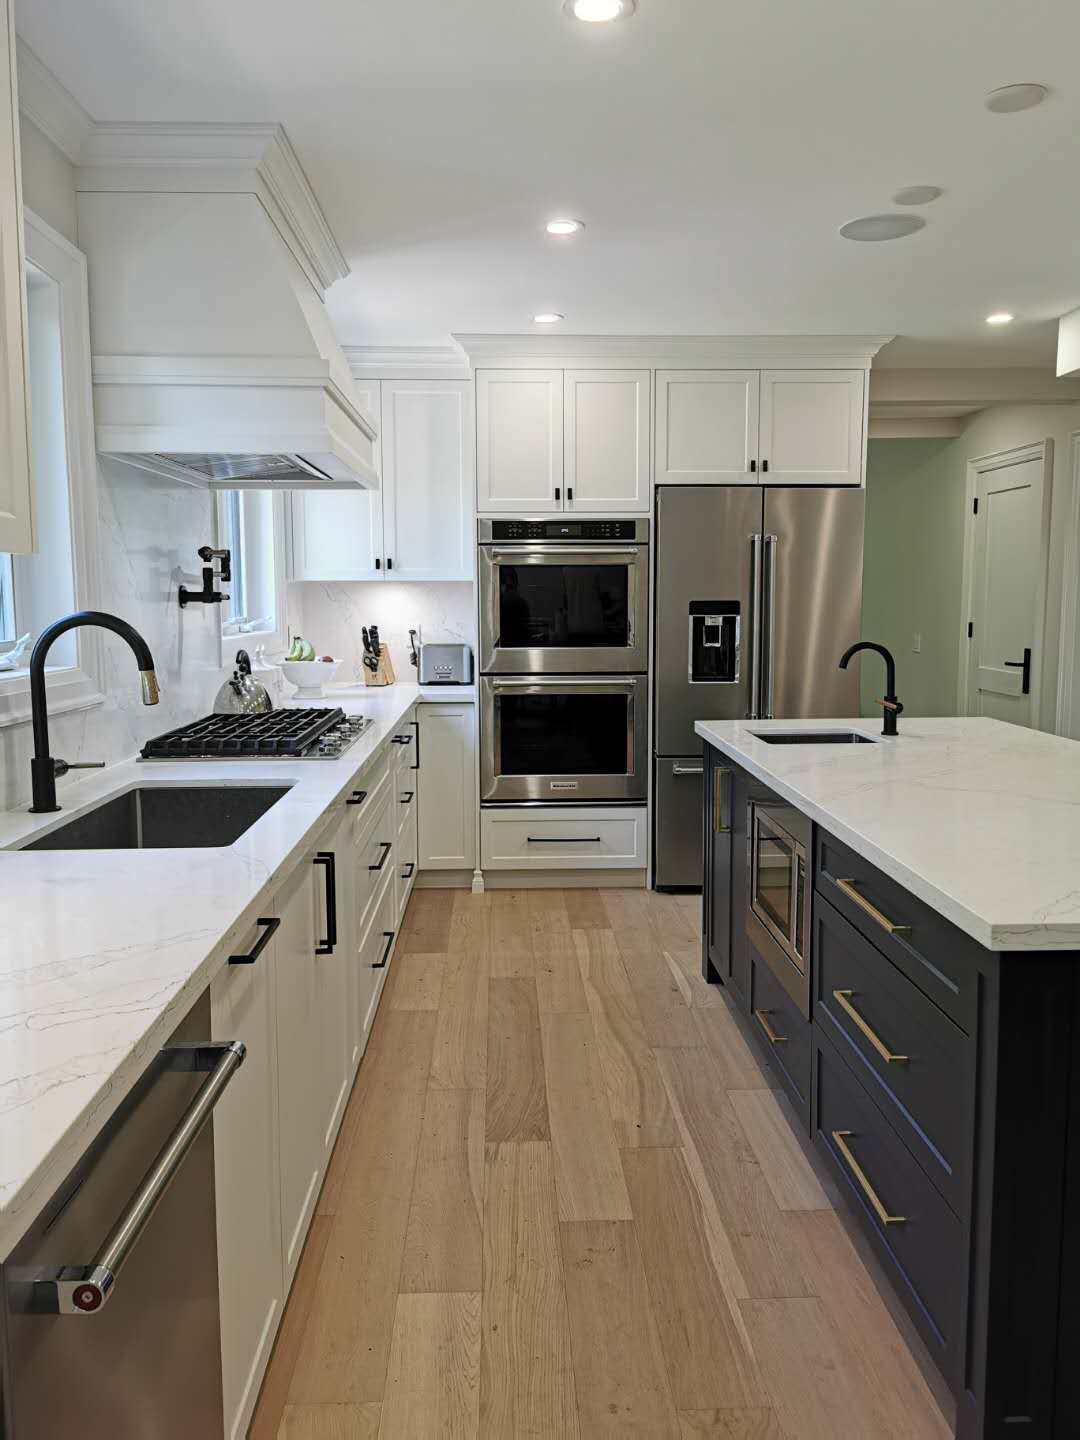 Modern Kitchen Featuring Duo Color Contrast Central Island and FLush Appliance Design - FengFa ...